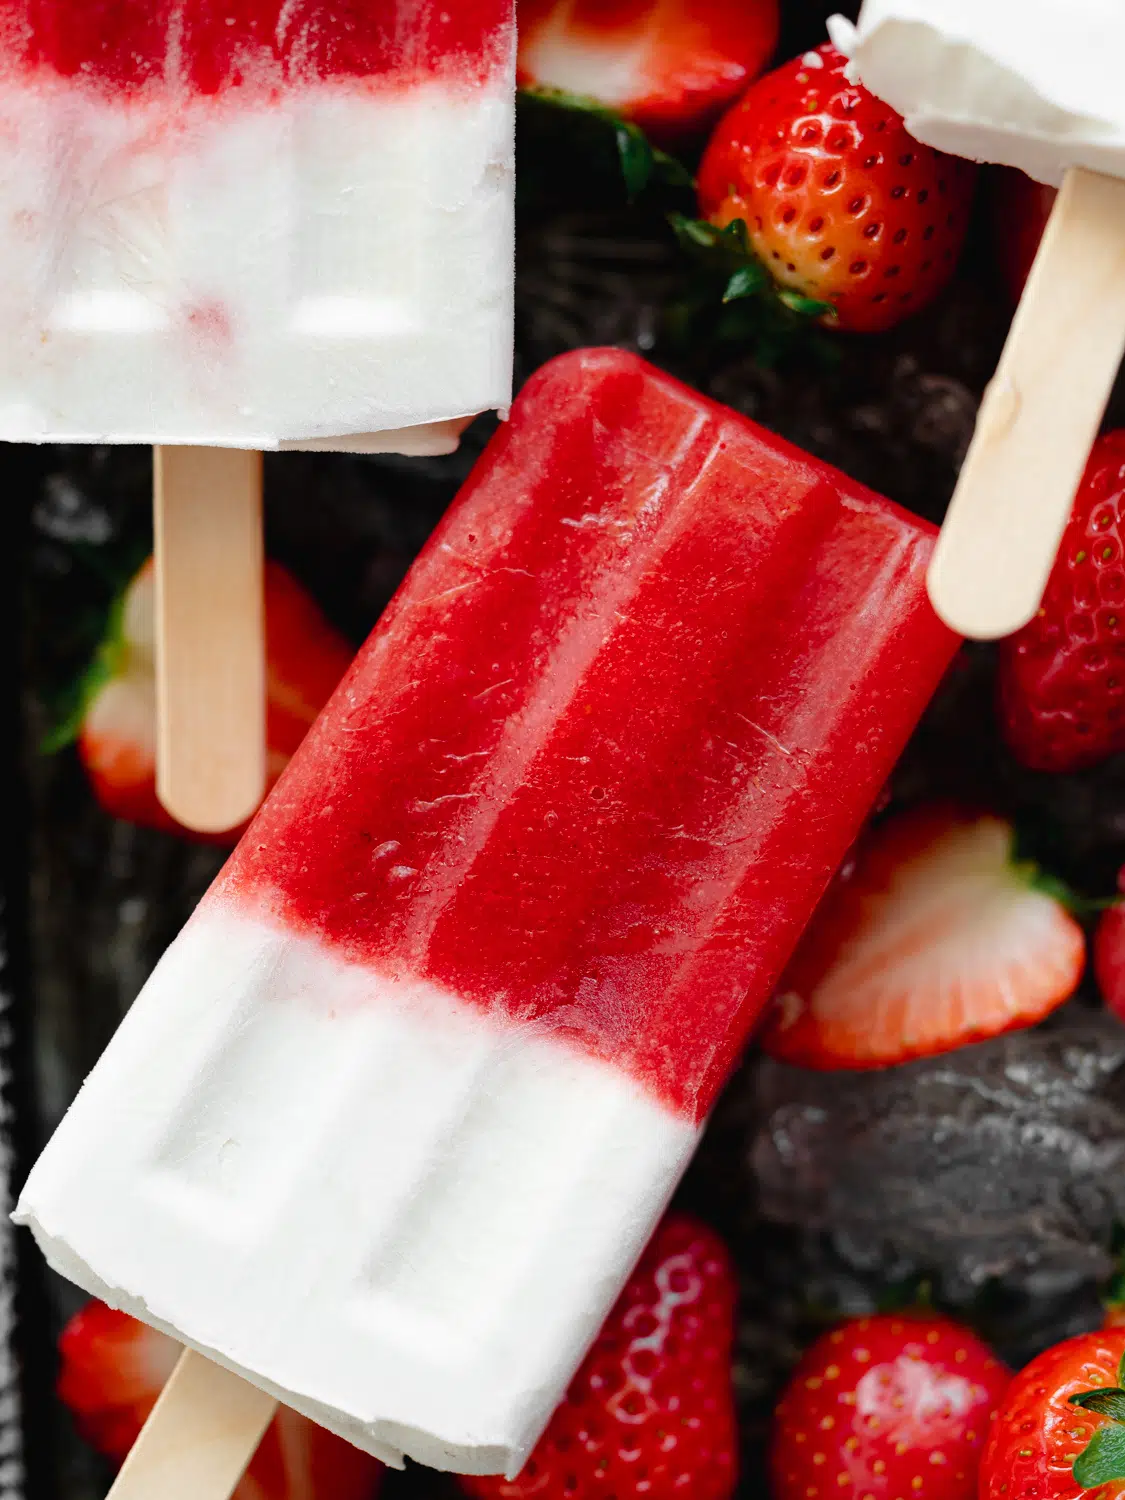 strawberry cream popsicles on a tray with ice and berries.